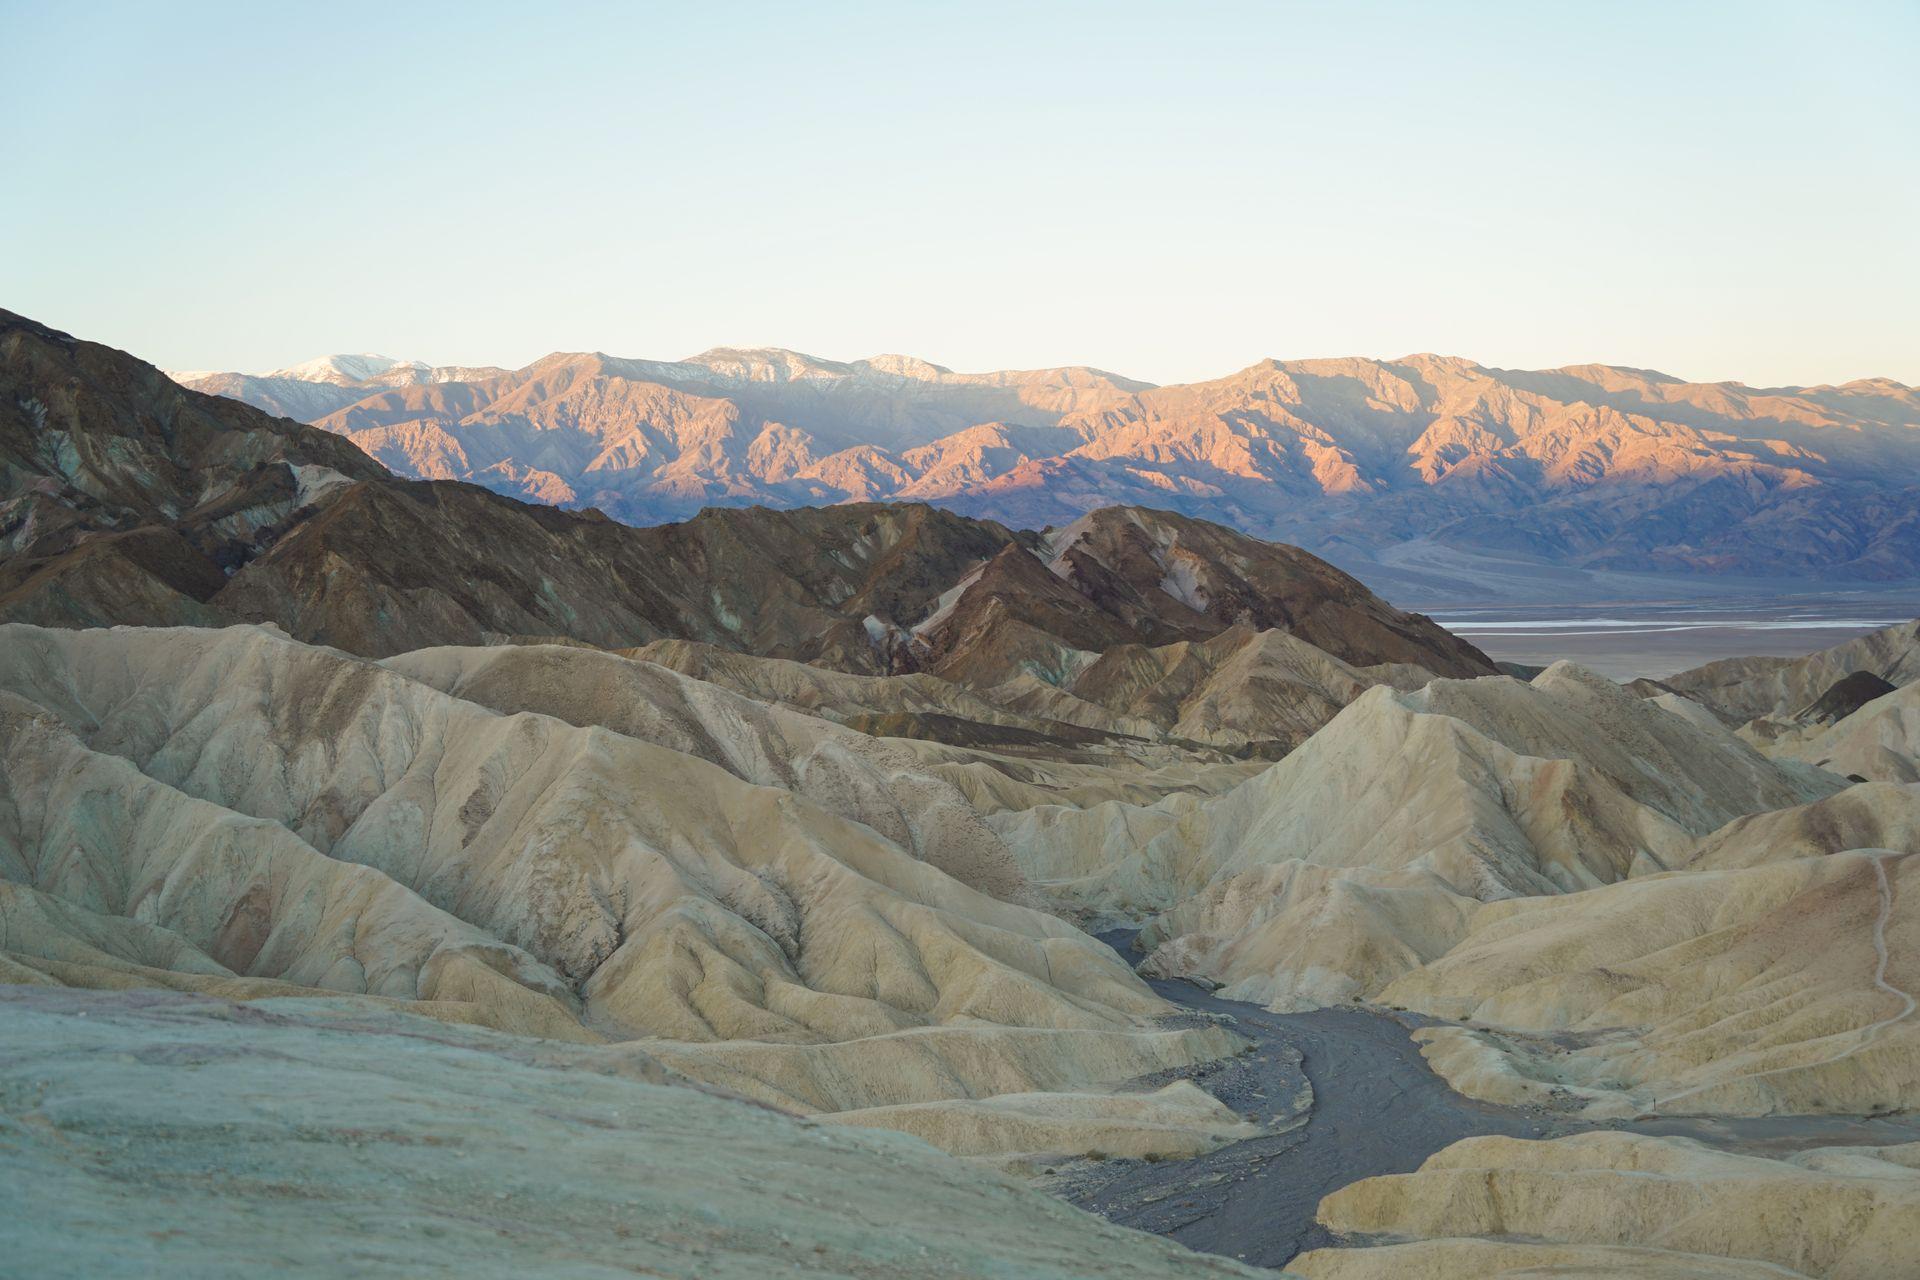 A landscape with badlands in various shades of brown. In the distance, mountains glow pink from the rising sun.